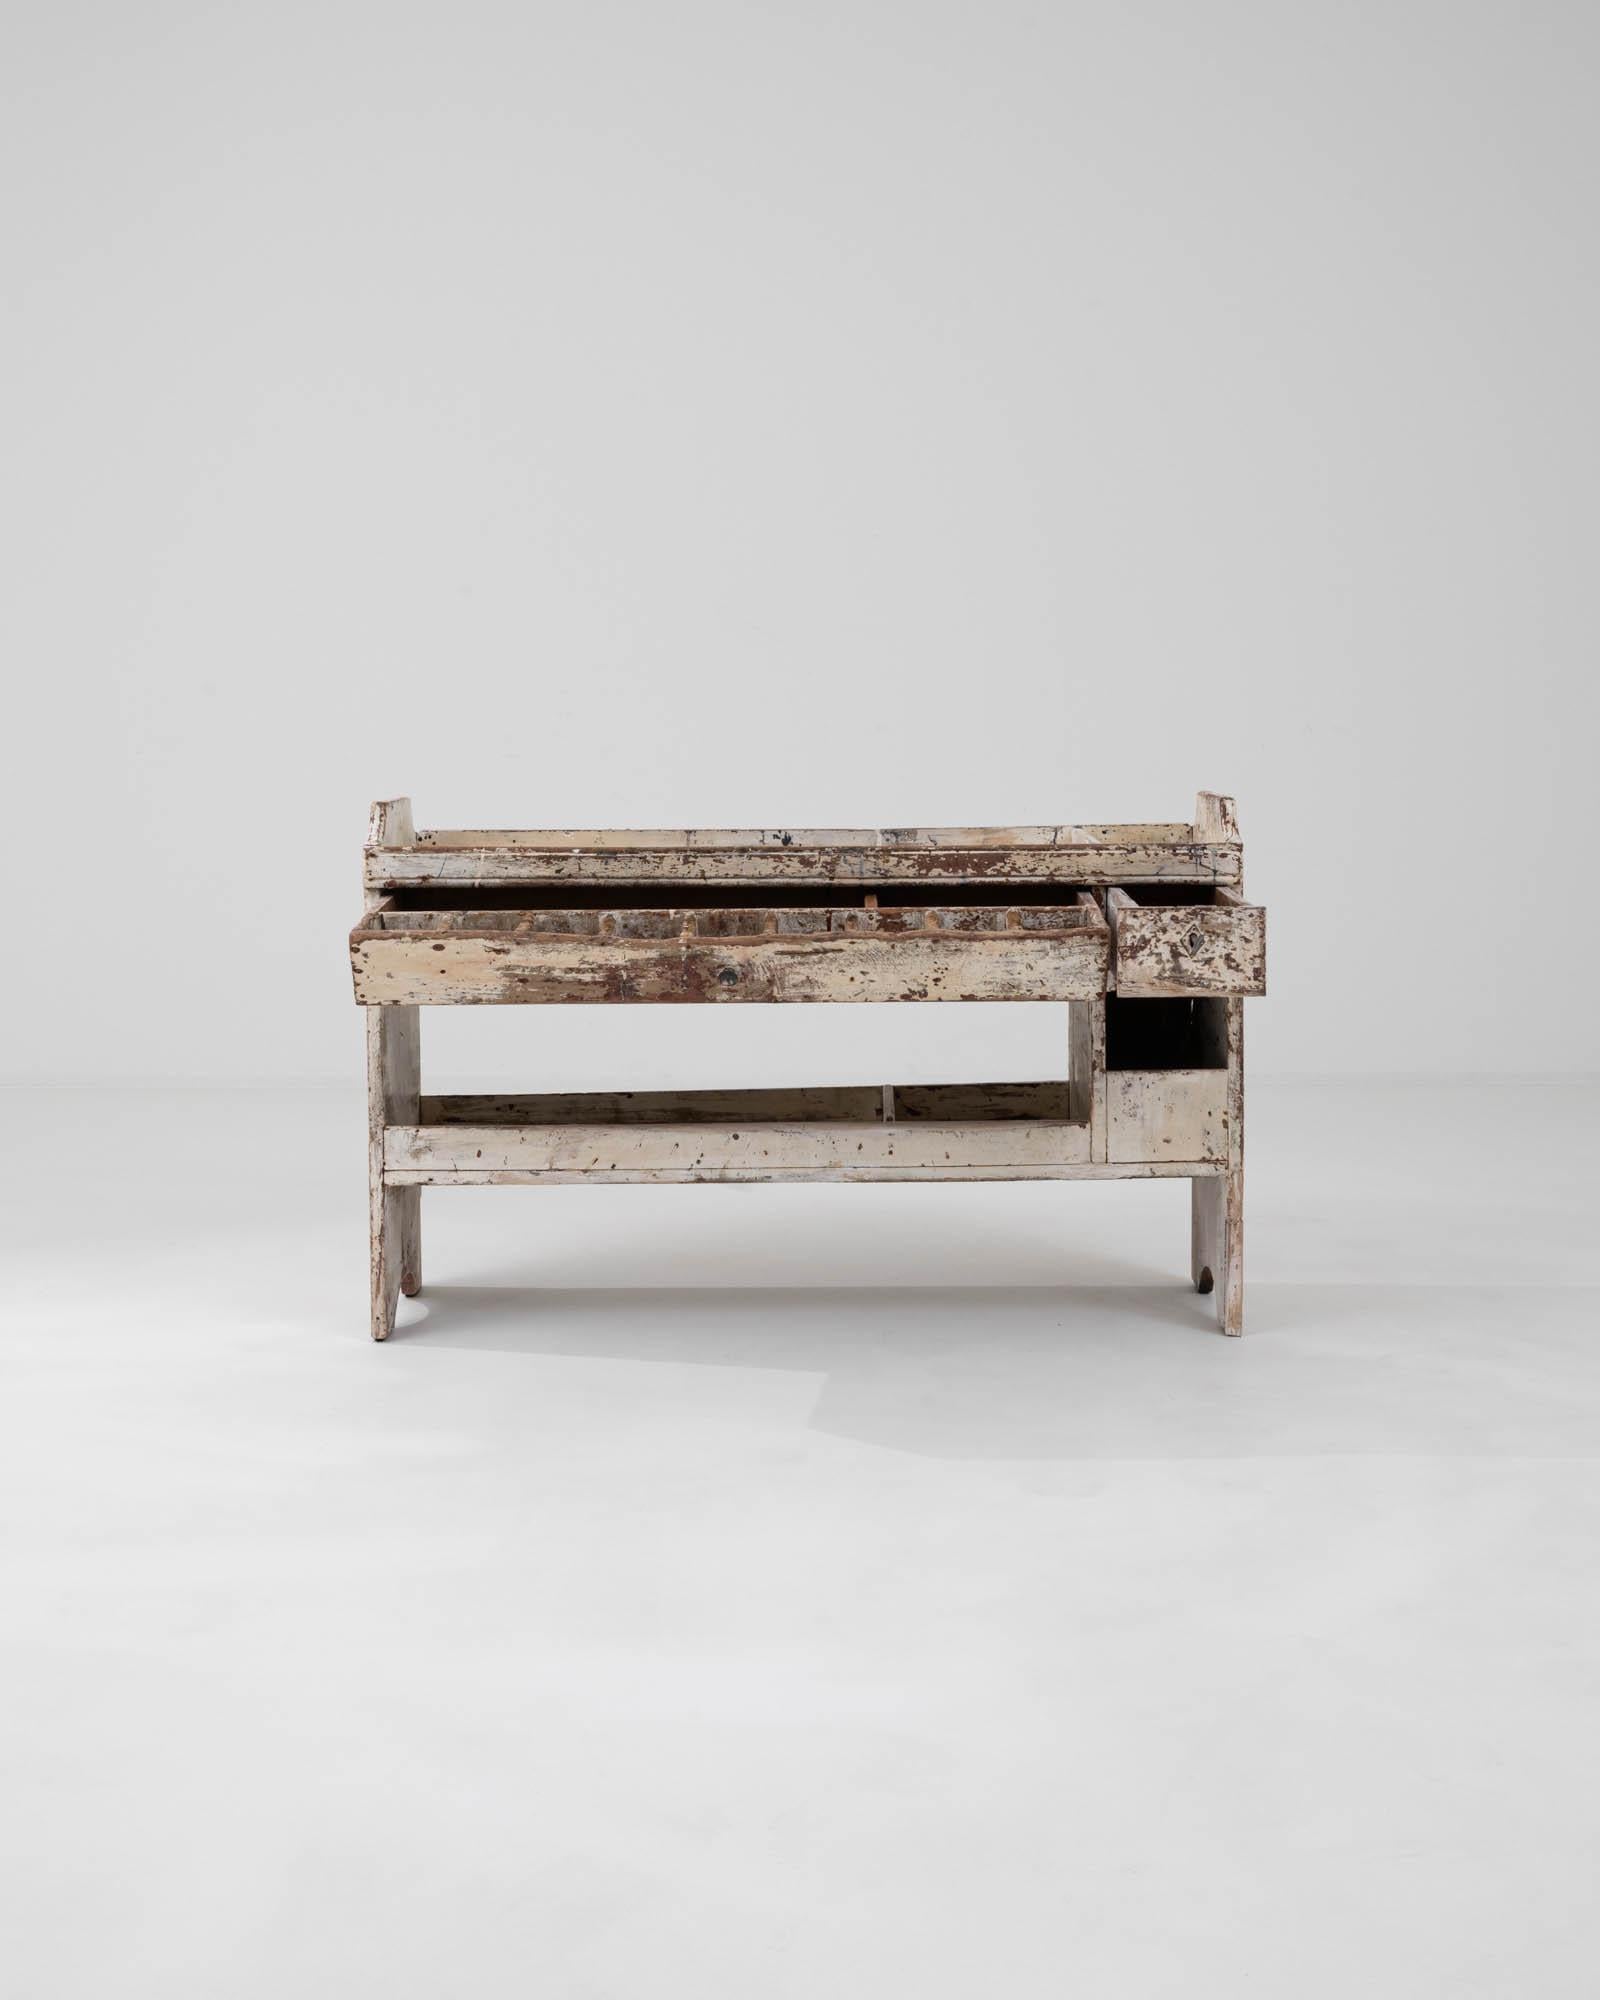 This 19th Century French Wood White Patinated Shelf exudes a rich sense of history through its lovingly worn white finish. Each layer of chipped paint and wood reveals stories of its past, adding depth and character to this unique piece. Designed